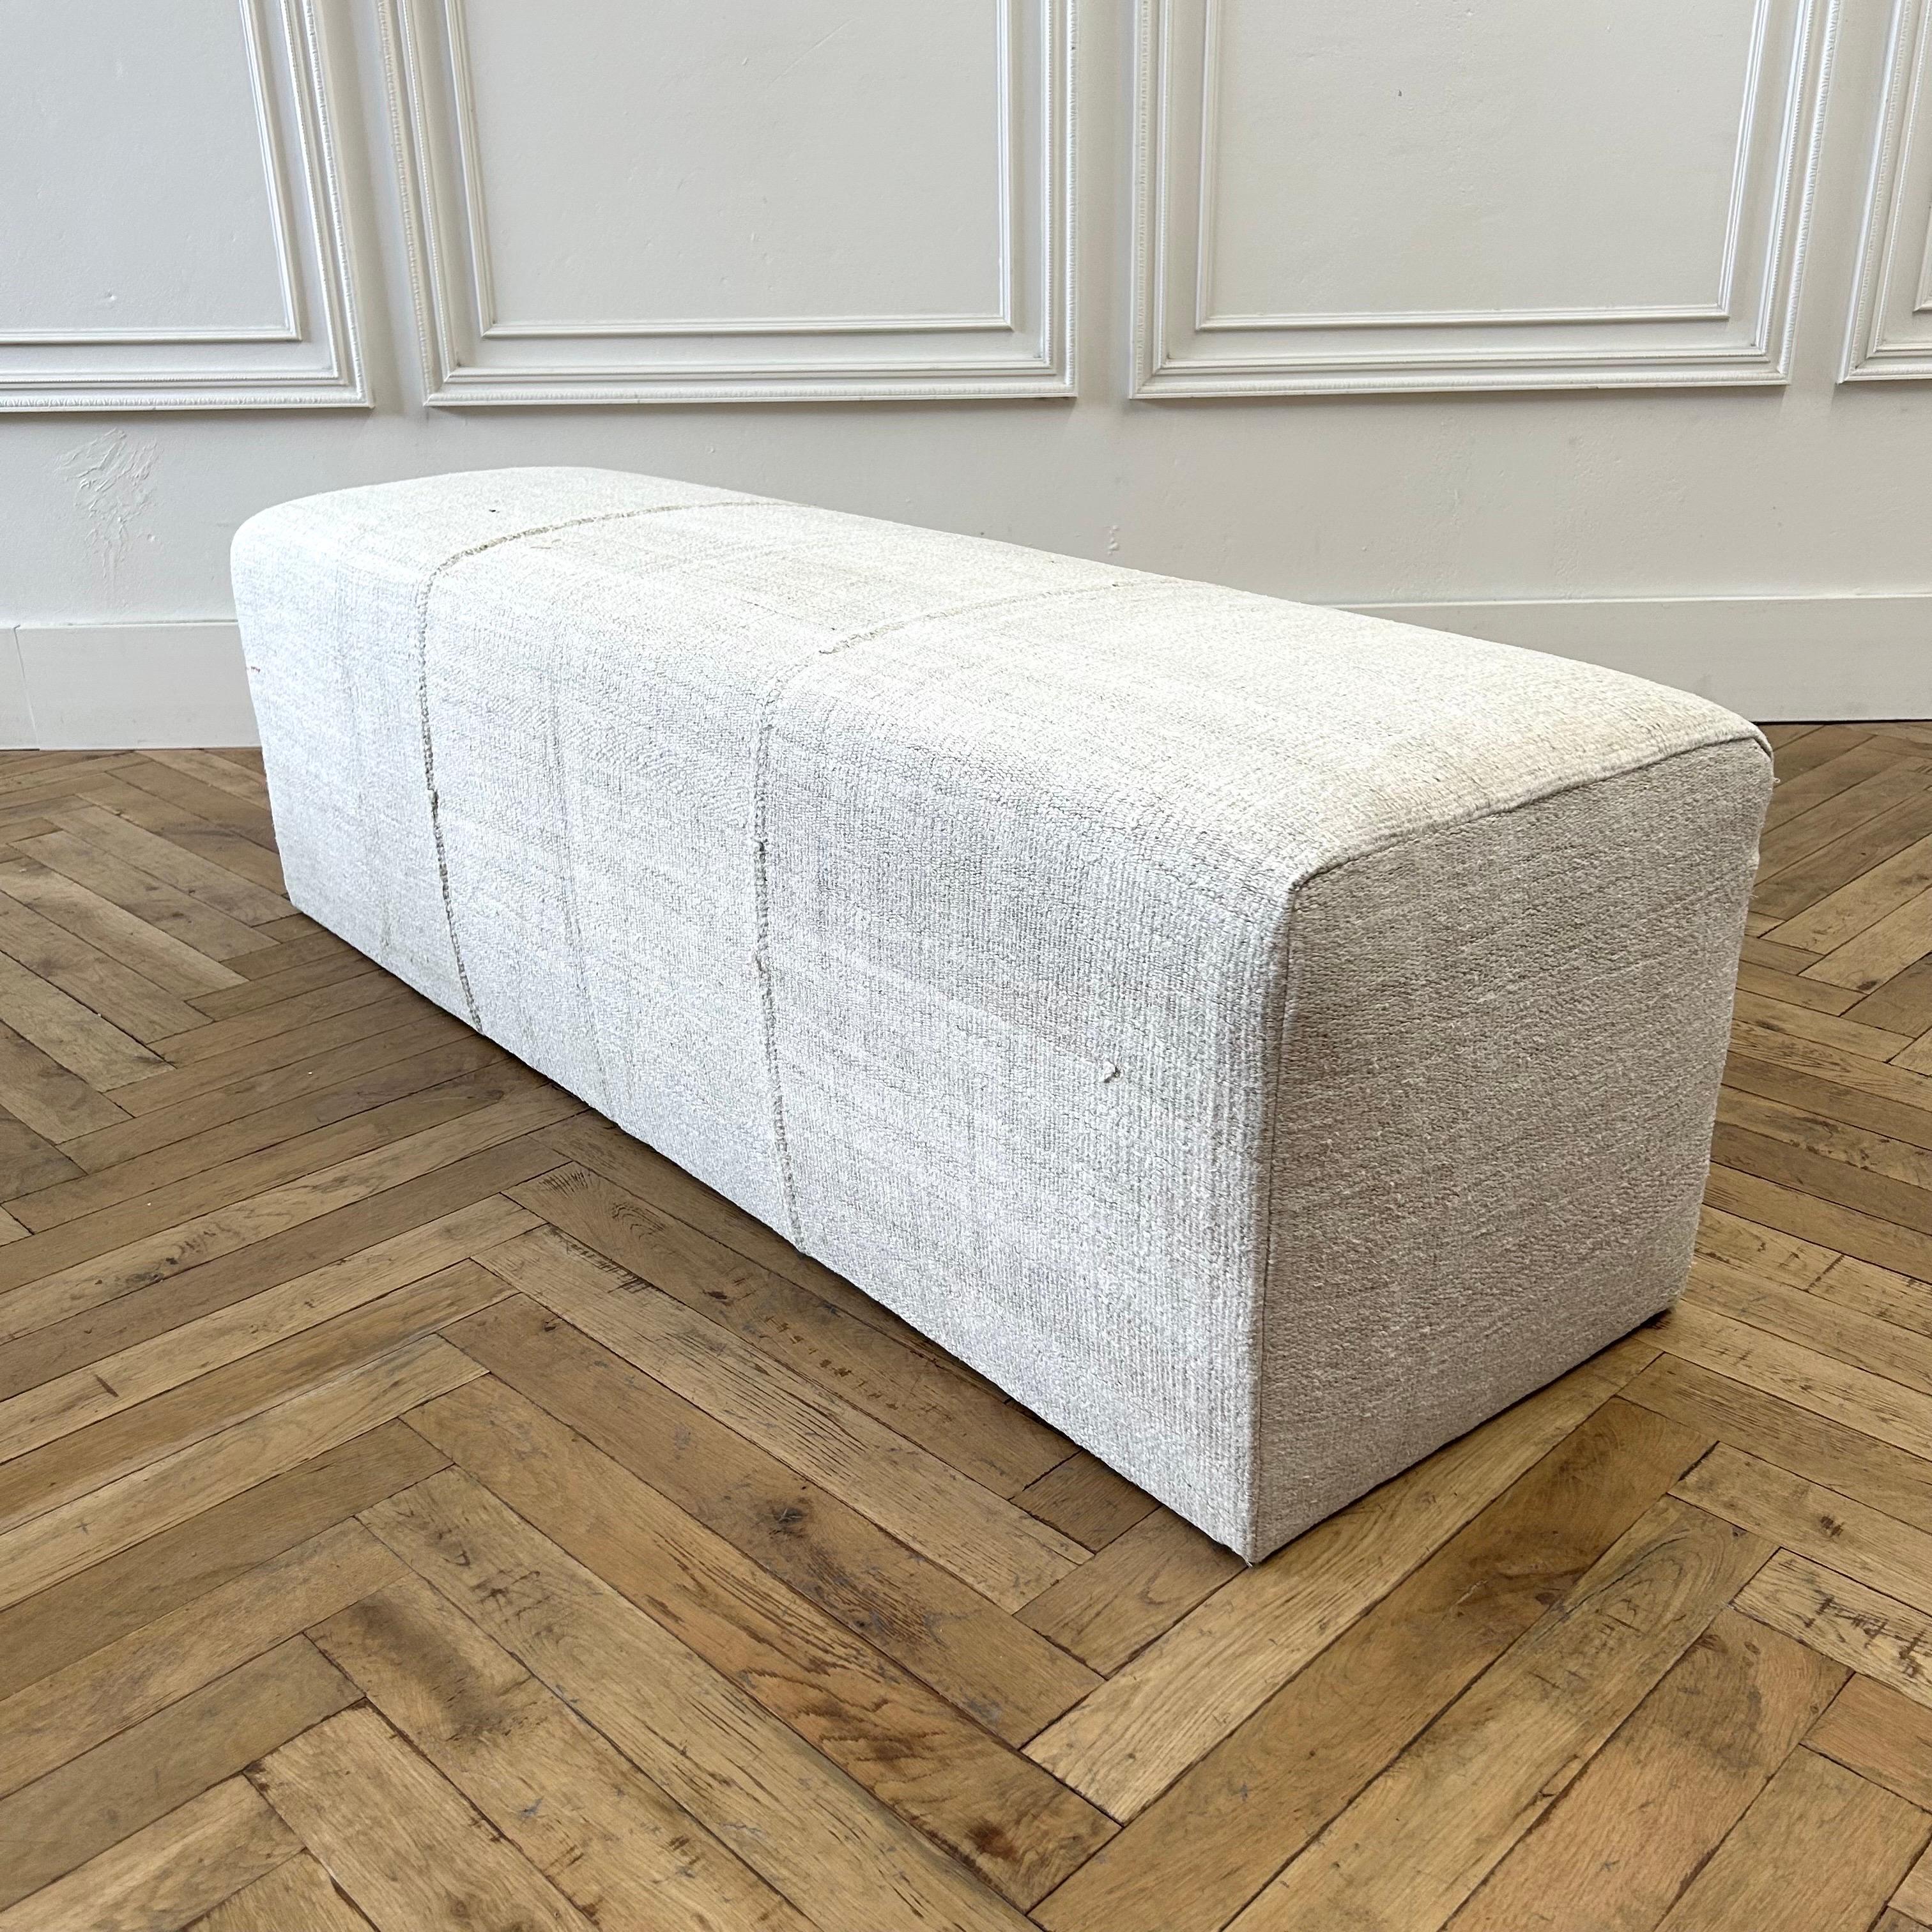 Cube ottoman 60”w x 18”d x 18”h
Beautiful Custom Made cube ottoman 
Made from a vintage turkish hemp and wool rug, in an off white, with original beautiful hand tied stitched center seam. Original seams, sewn with an overlock under to prevent any